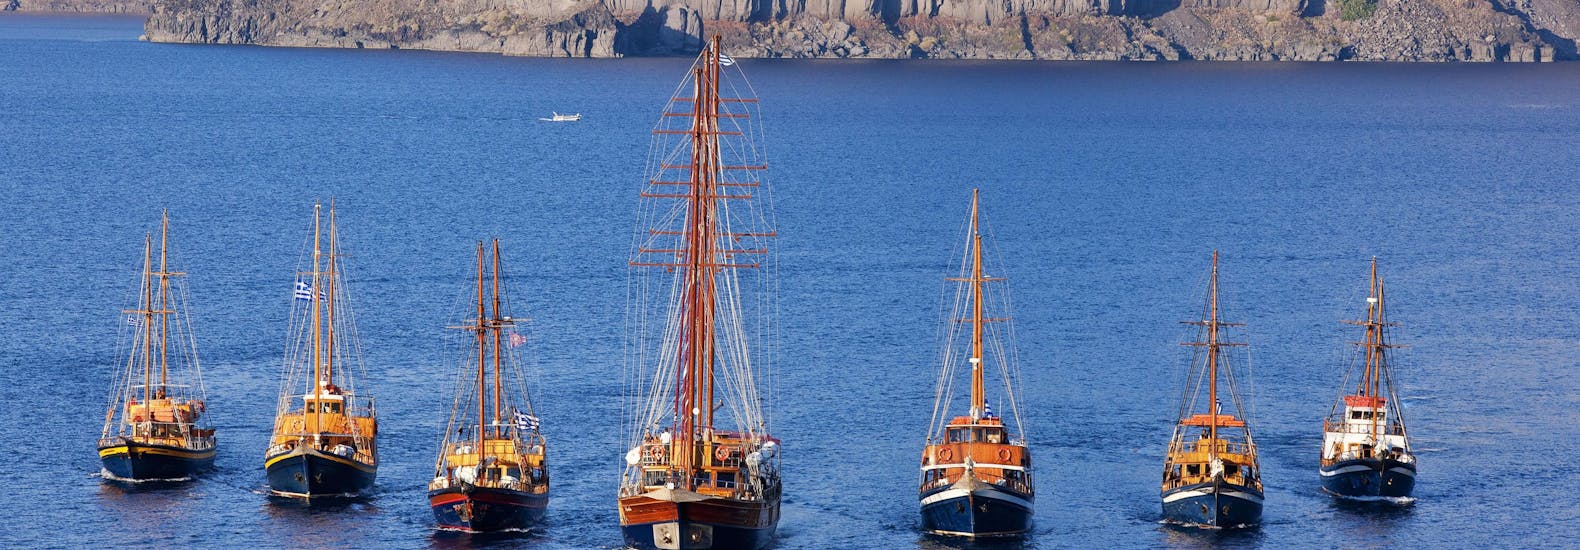 The fleet of boats available for the sunset sailing trip from Santorini to the Volcano with Caldera's Boats Santorini.